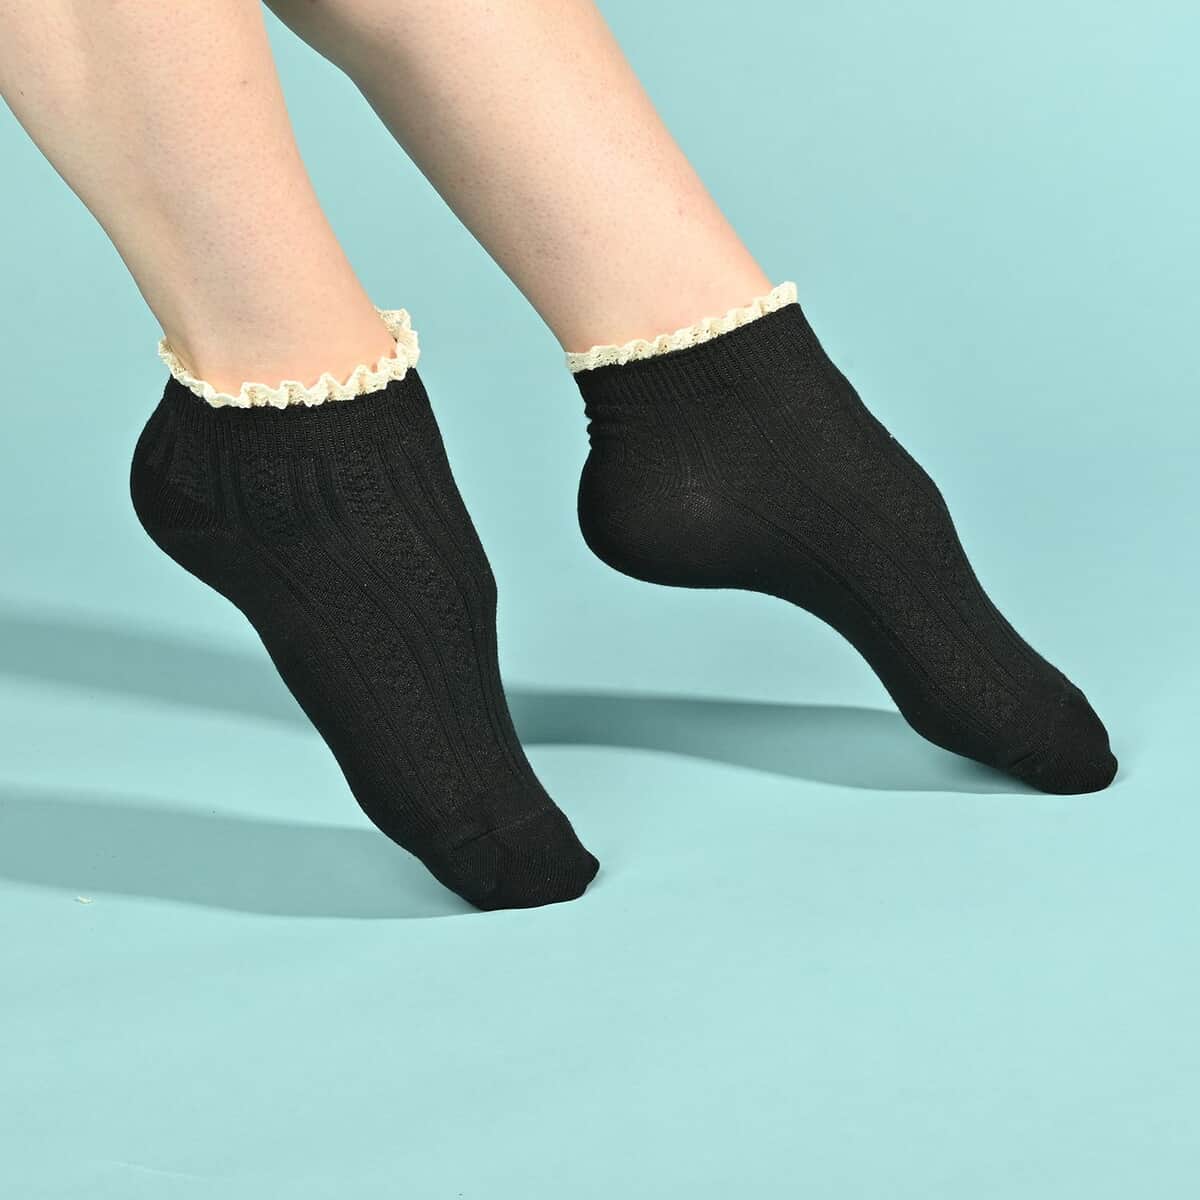 Ankle Sock Set of 4- Classic - White, Black, Heather Gray and Chic Blush image number 3